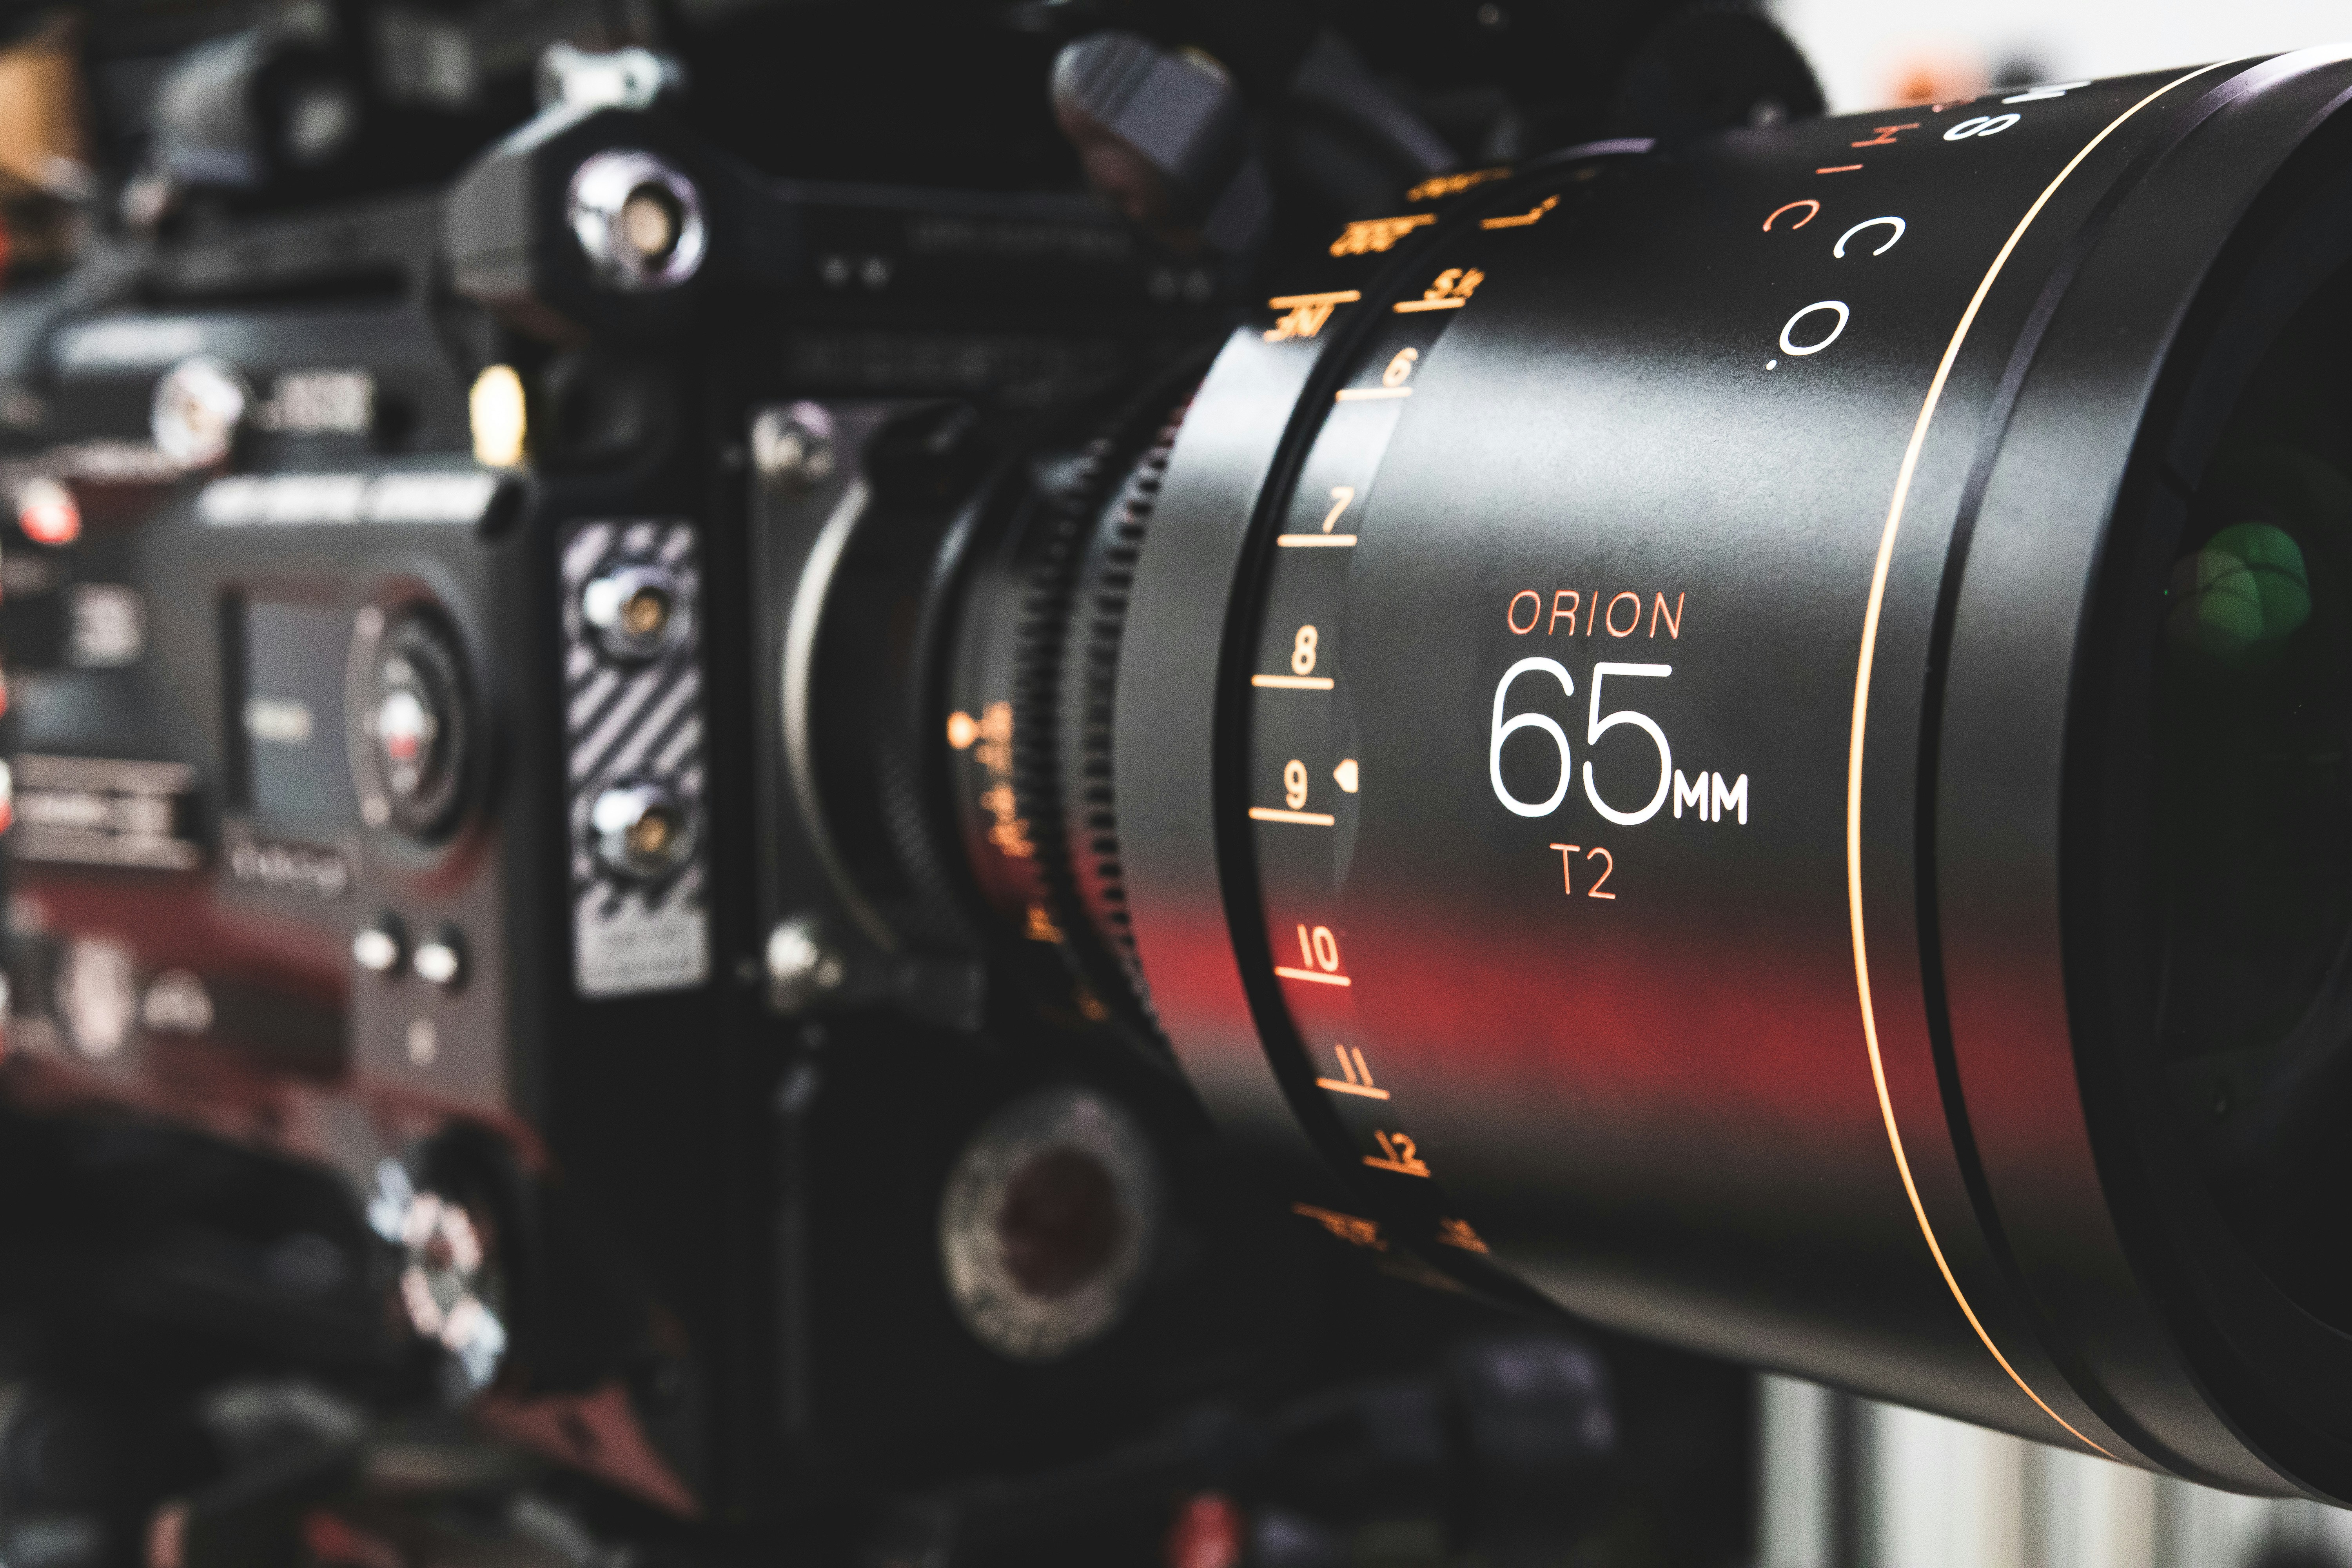 One of hottest names in anamorphic right now is the Orion Series from Atlas Lens Co. We here at Voice & Video may not be getting a Monstro or Ranger any time soon, but we wait with bated breath for our full set of Atlas Anamorphics. Don't worry, you'll know when they arrive...